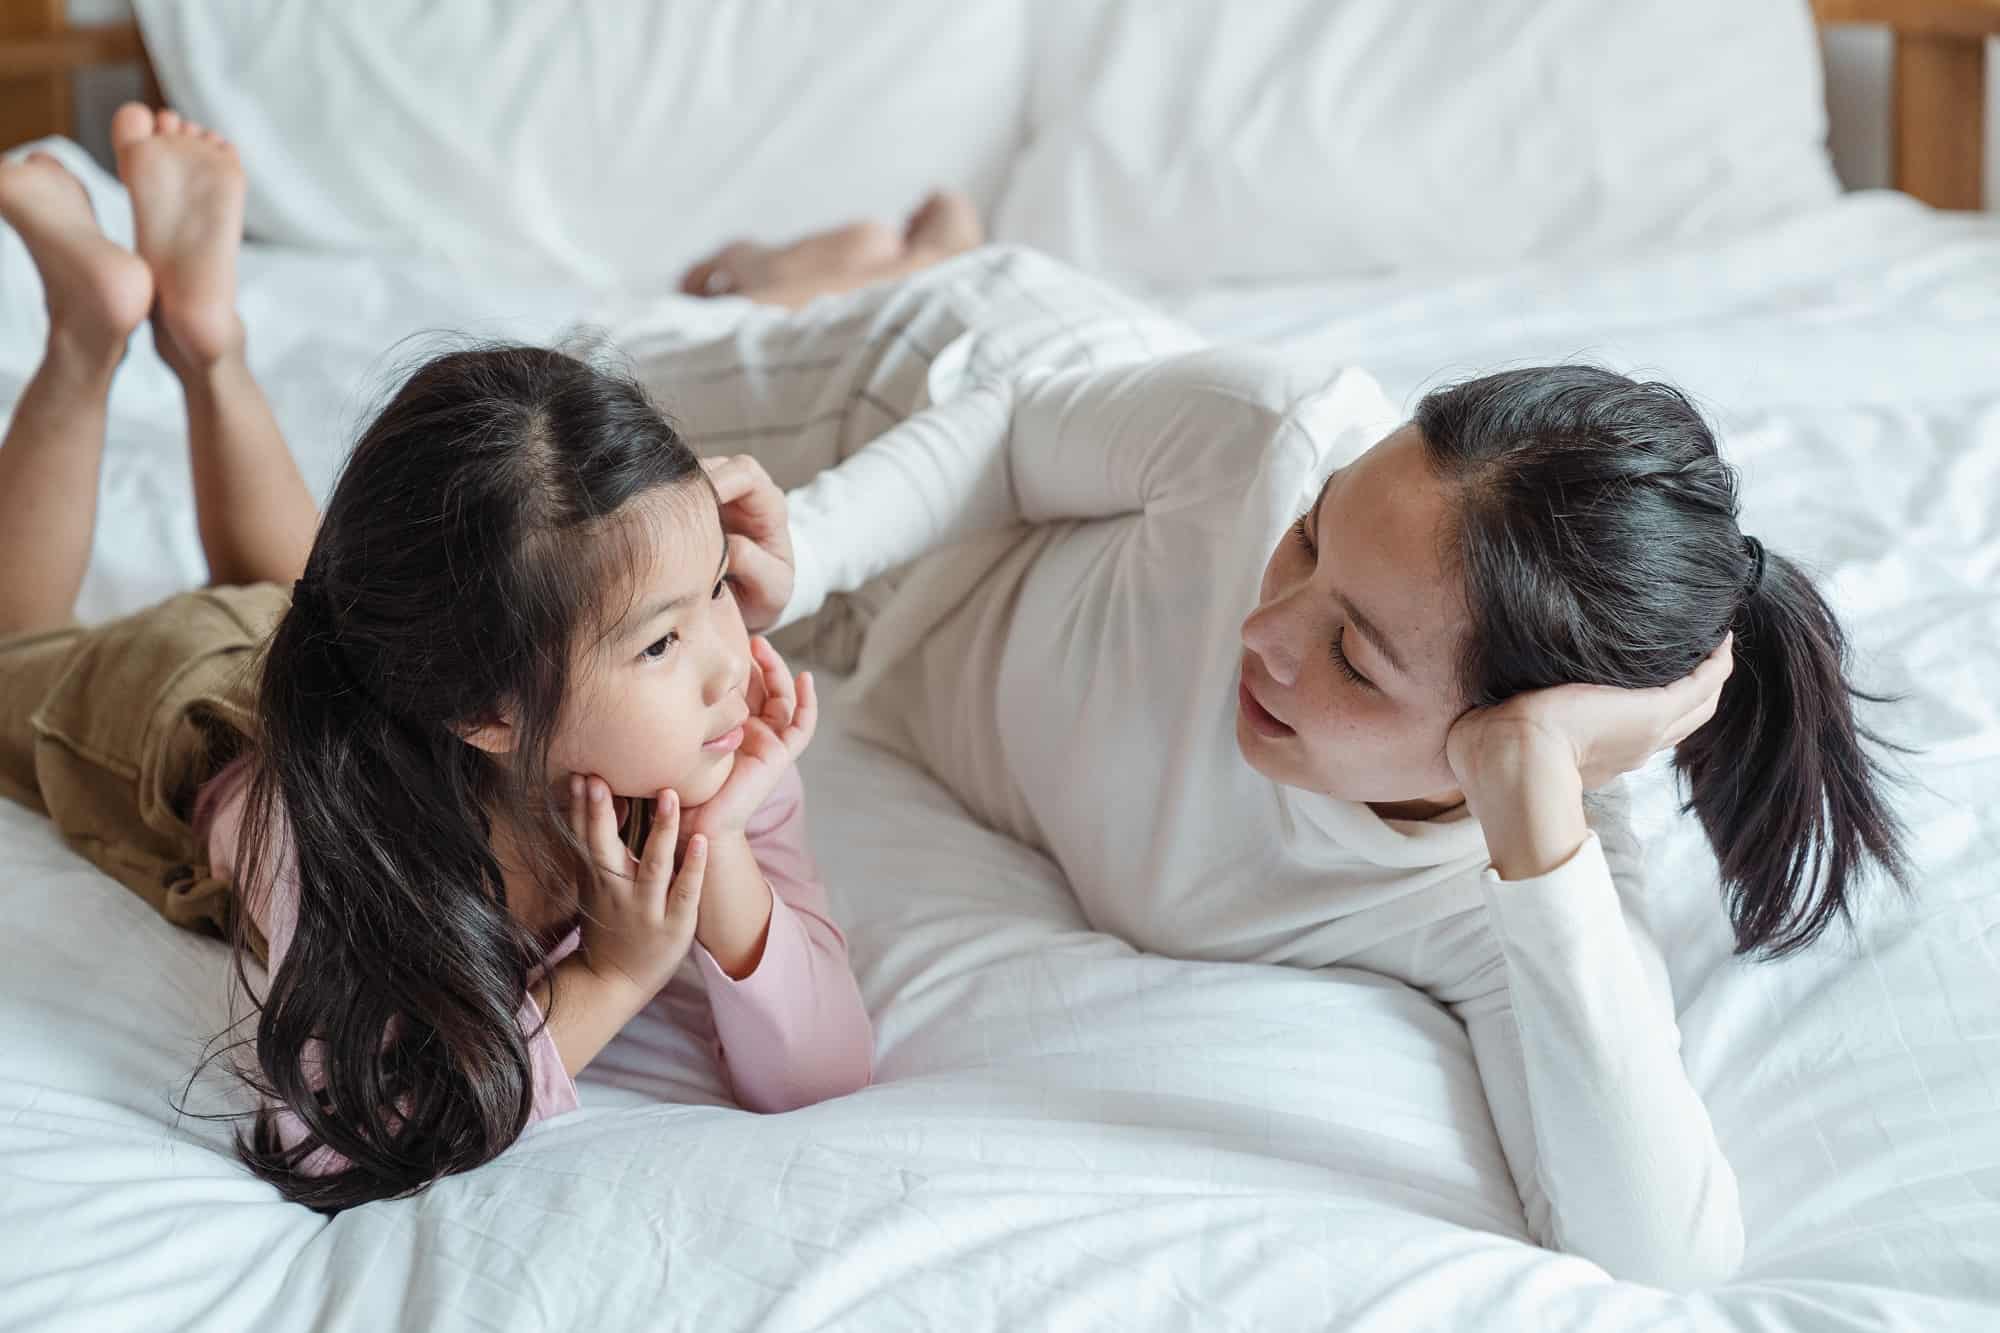 How do you talk to your child about sex without it being an embarrassing experience?